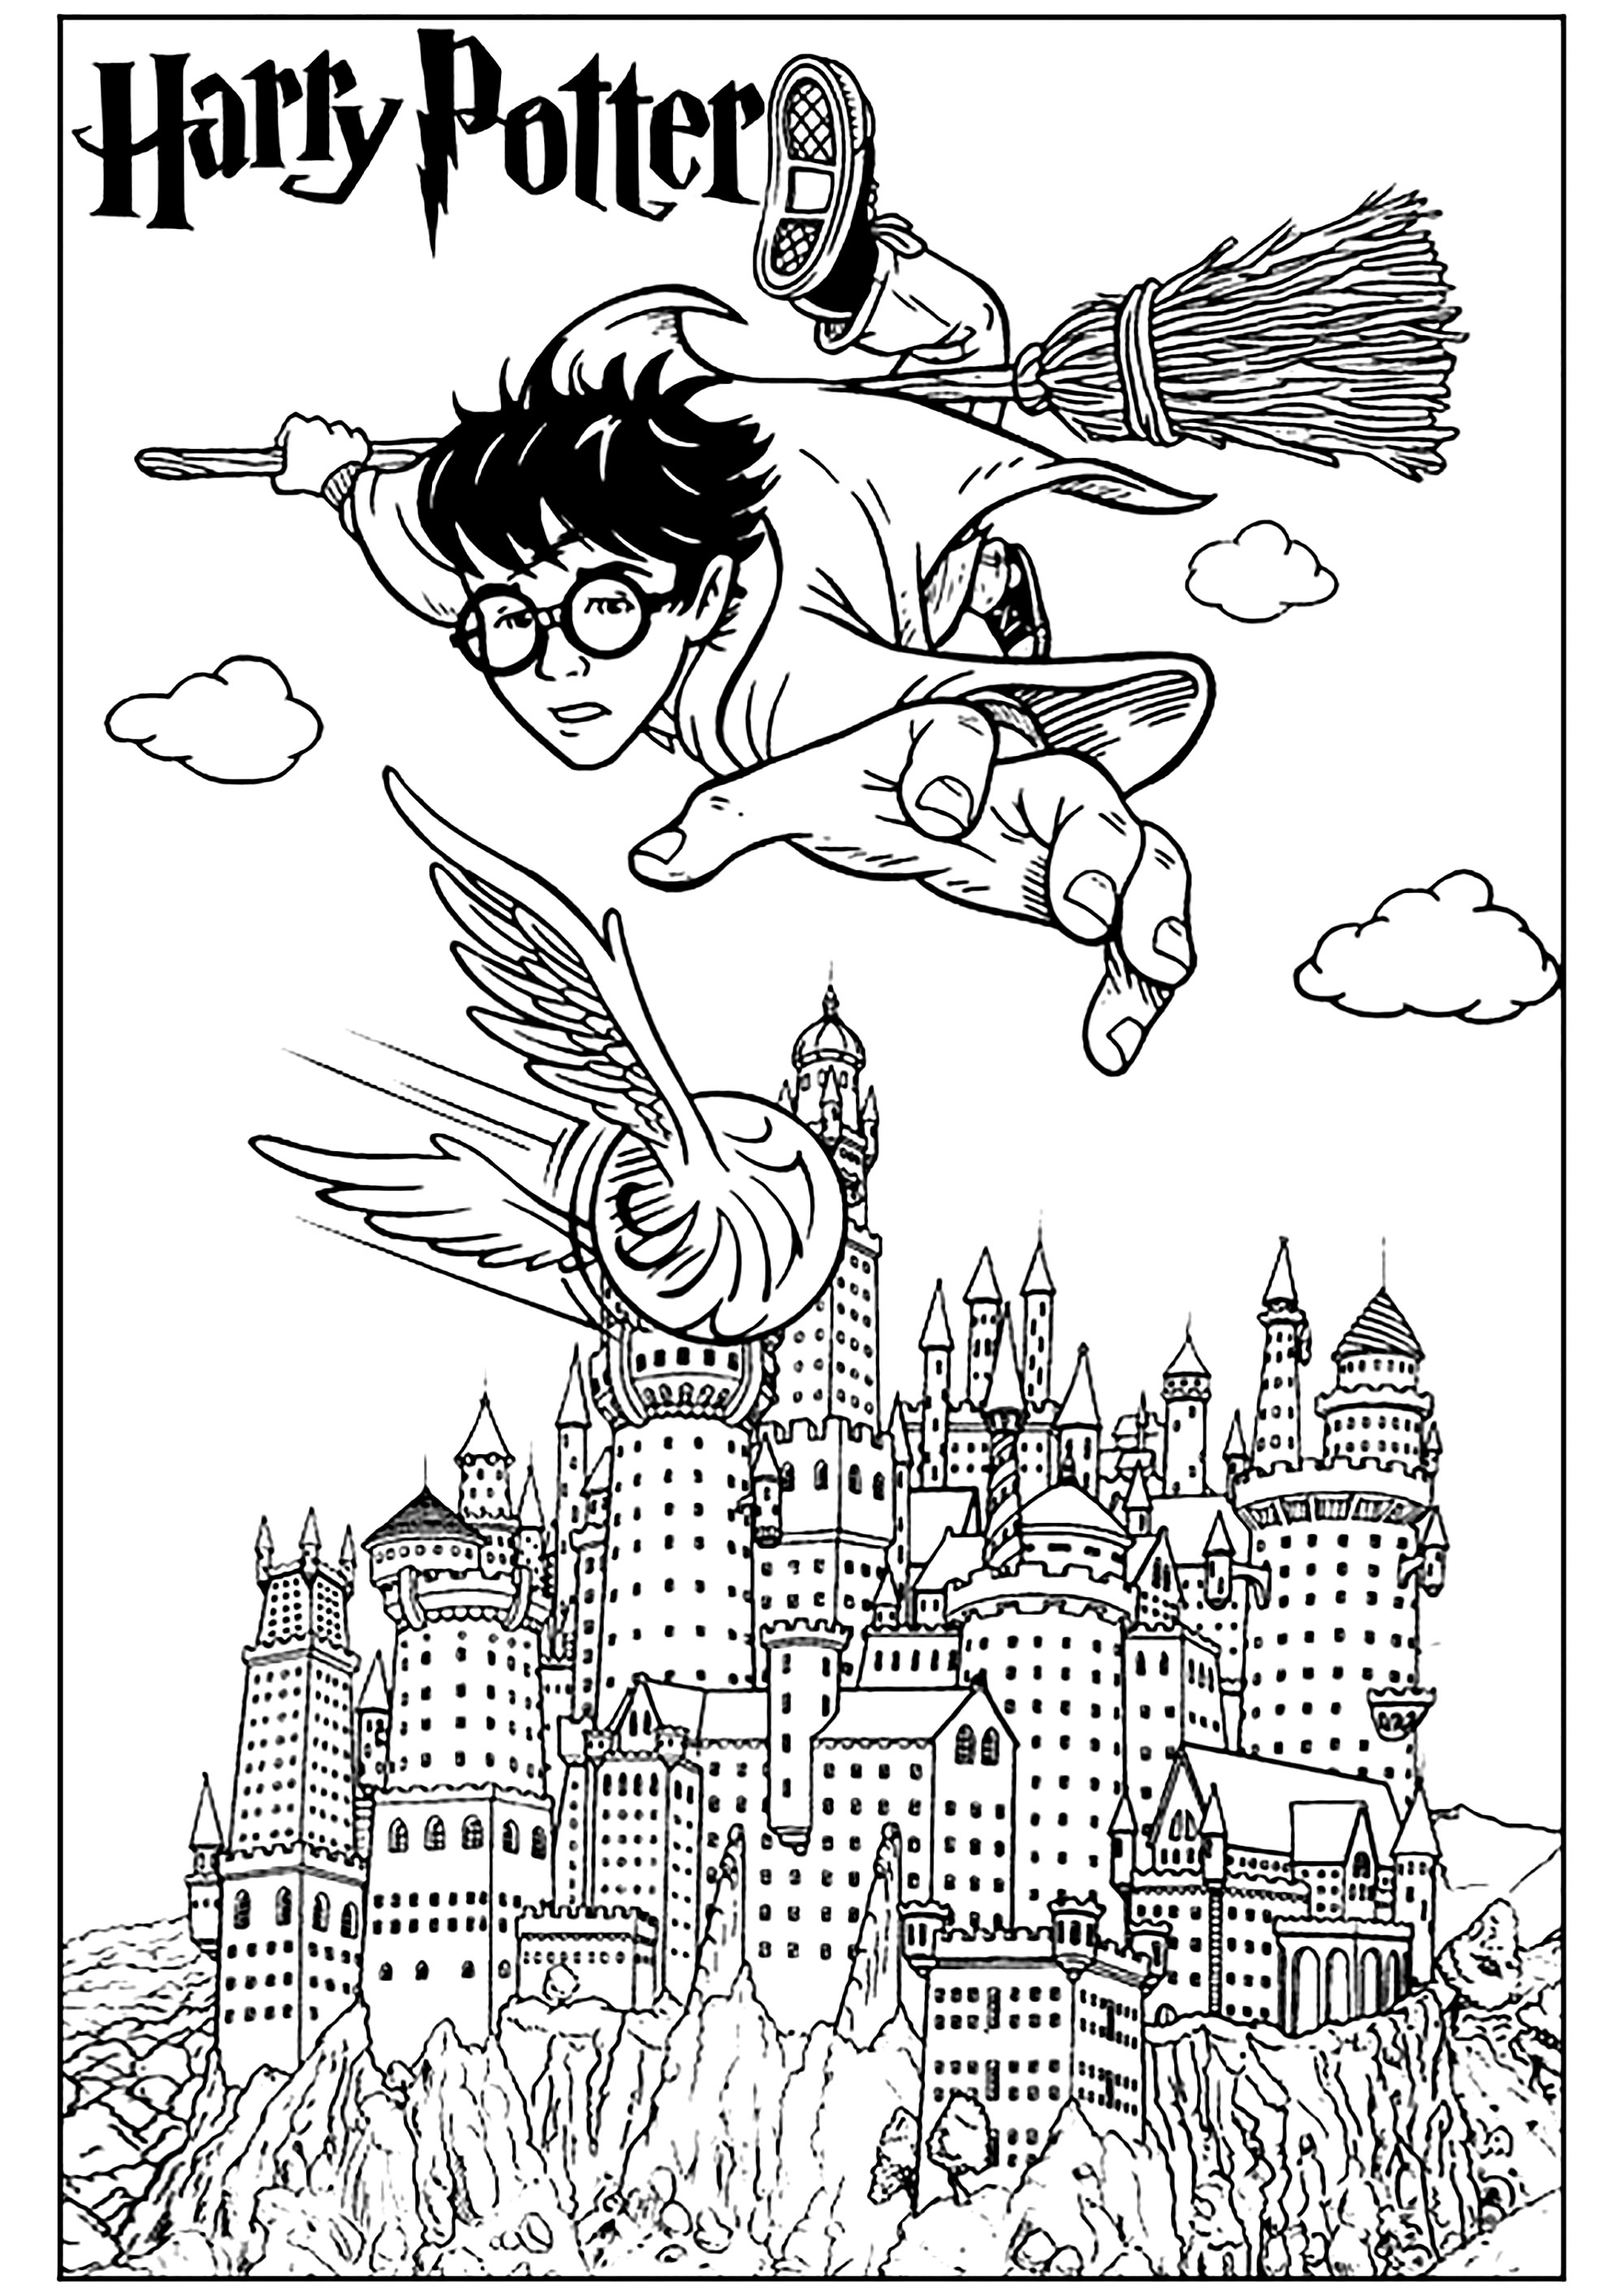 Harry Potter flying over Hogwarts during a Quidditch match